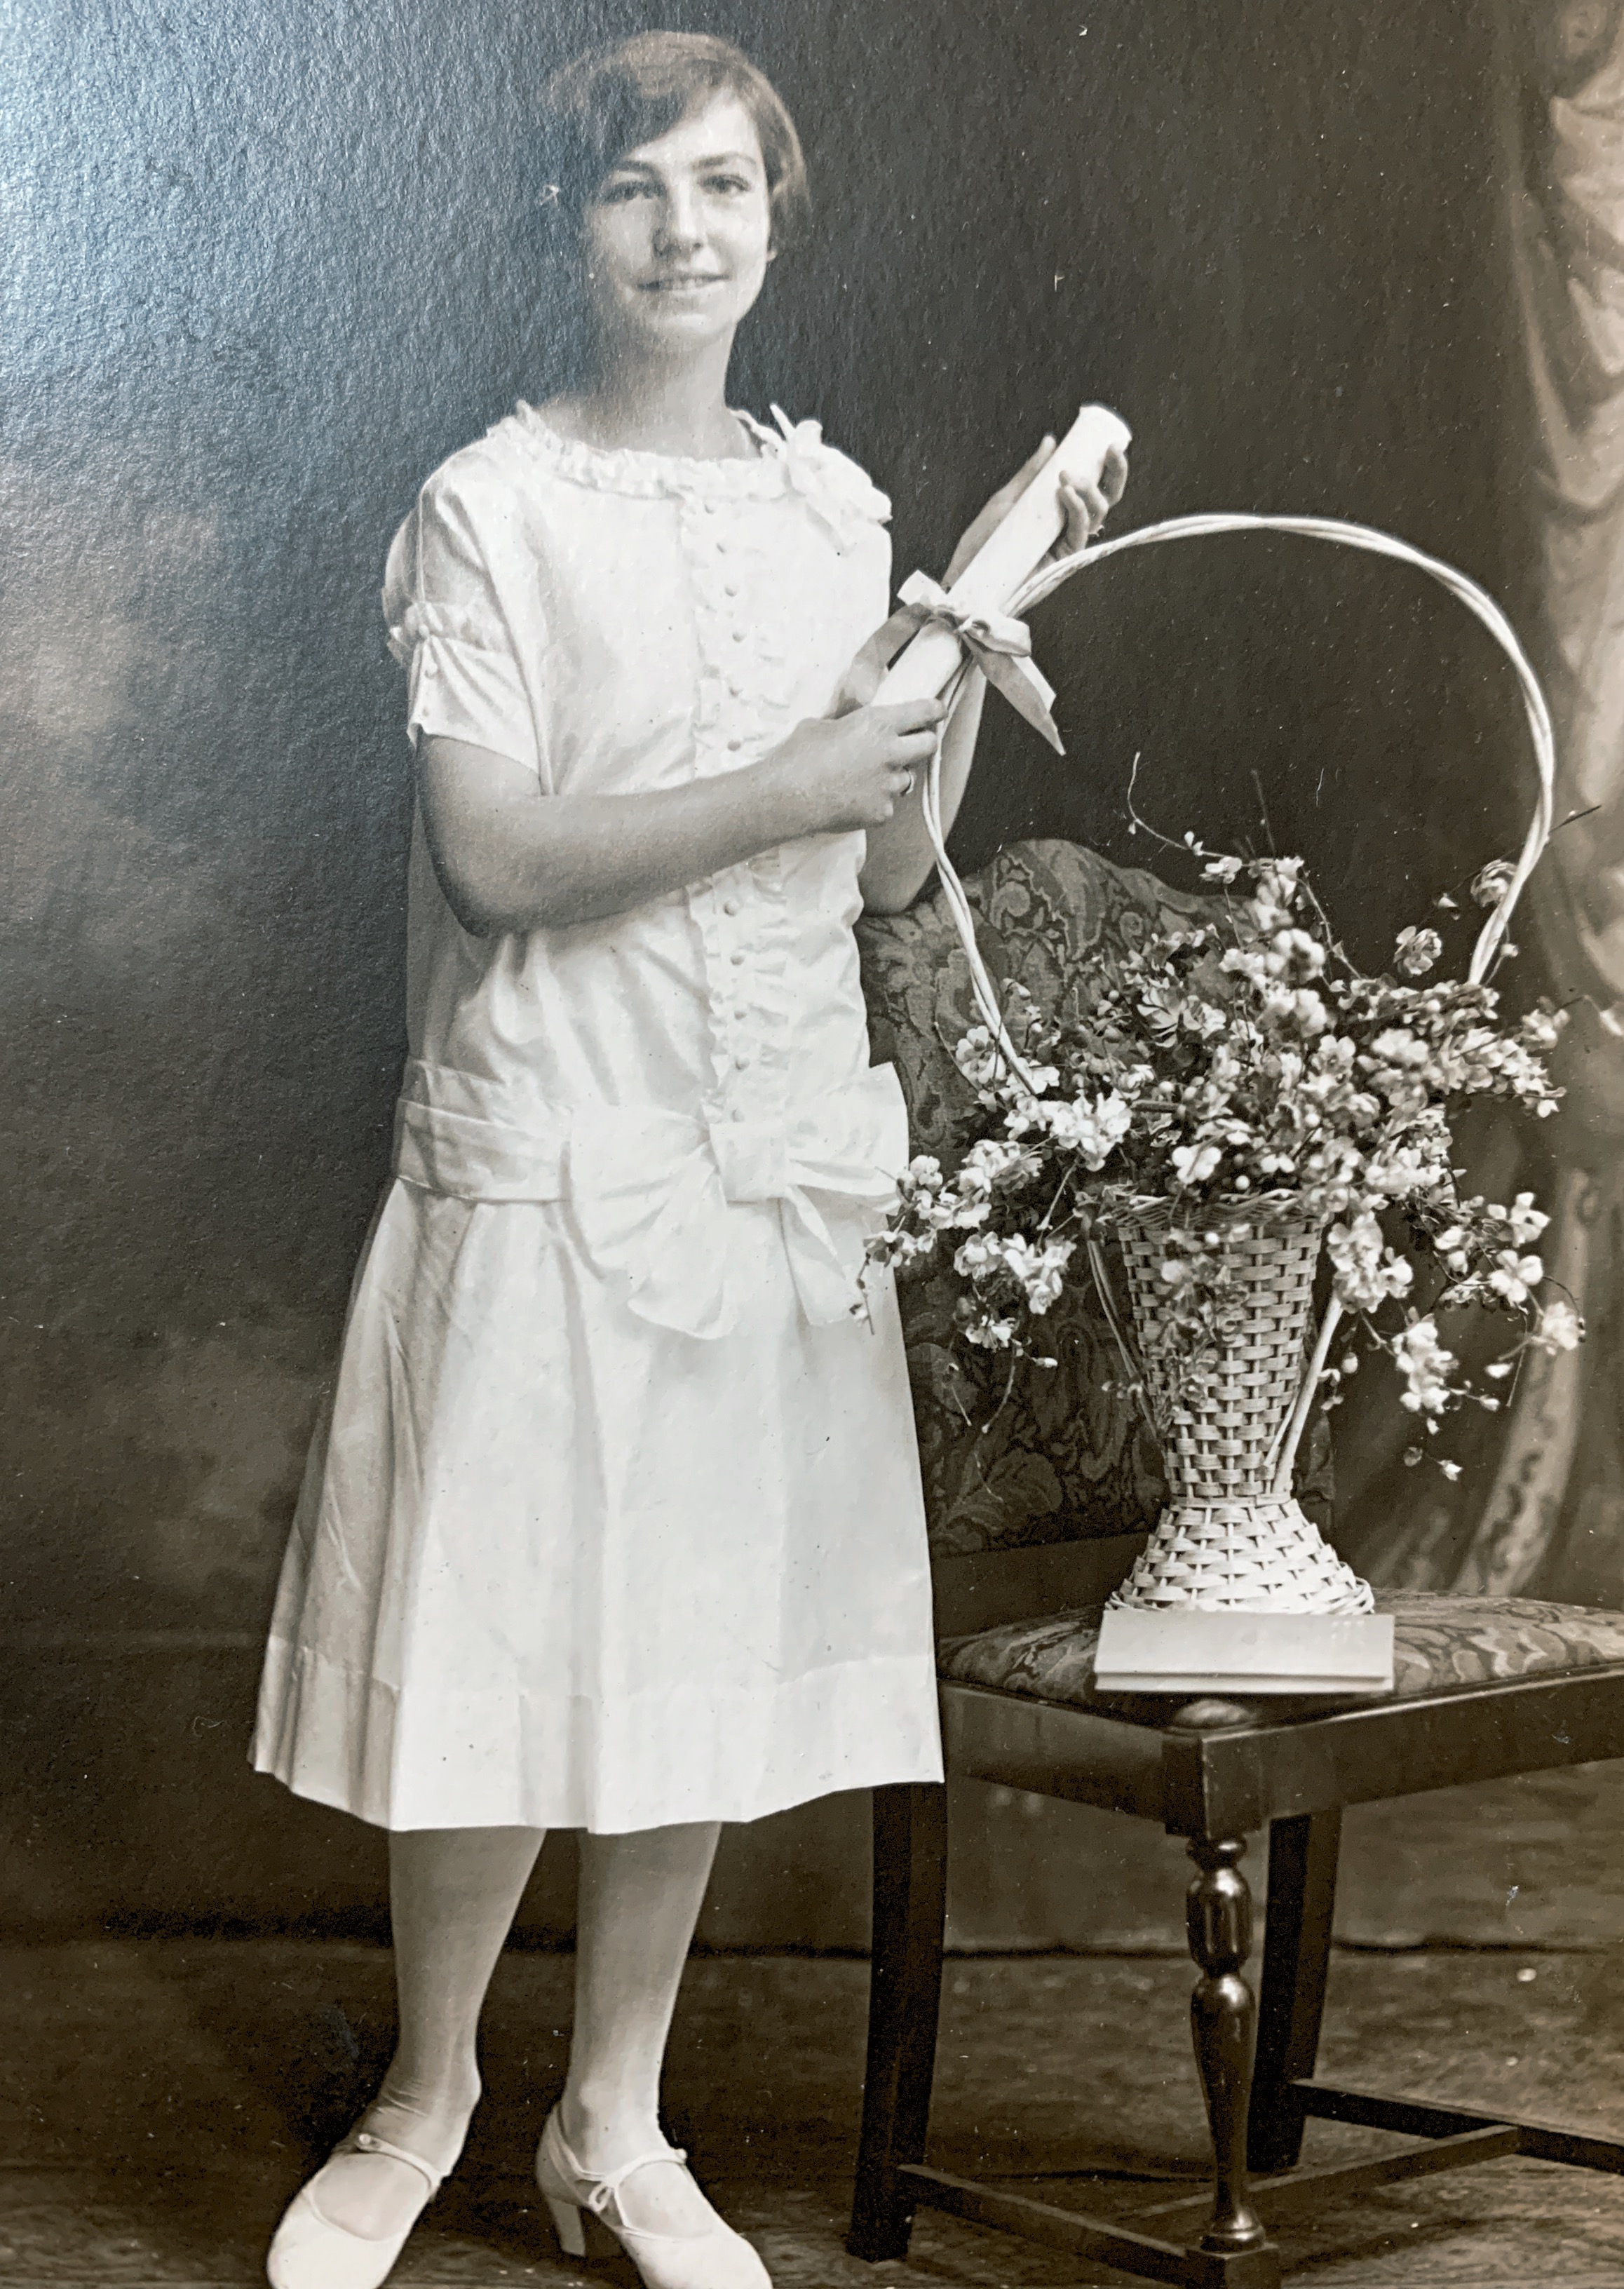 Dorothy Fox on the day of her 8th grade graduation-1926